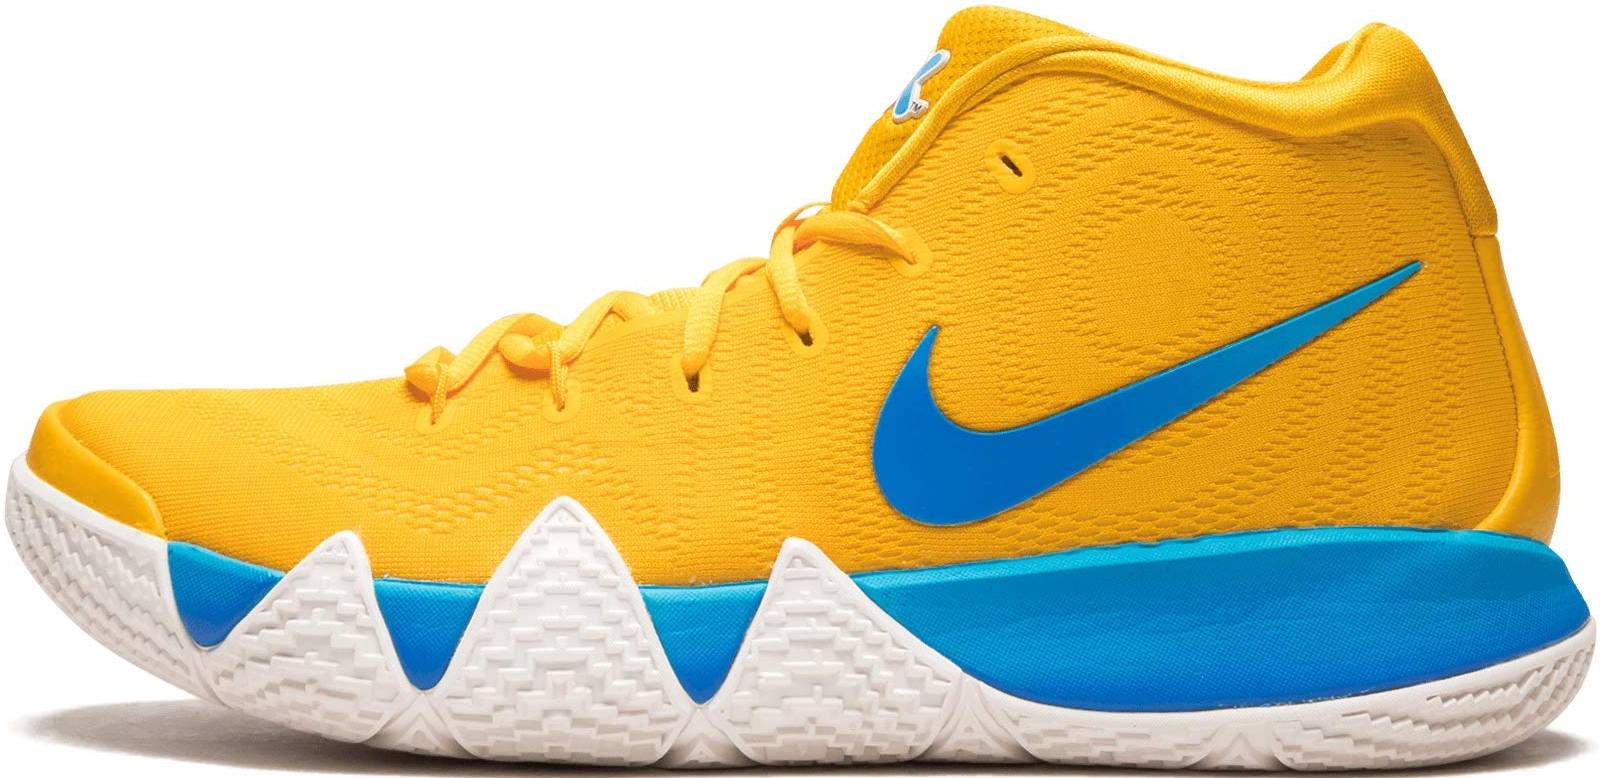 blue and yellow basketball shoes